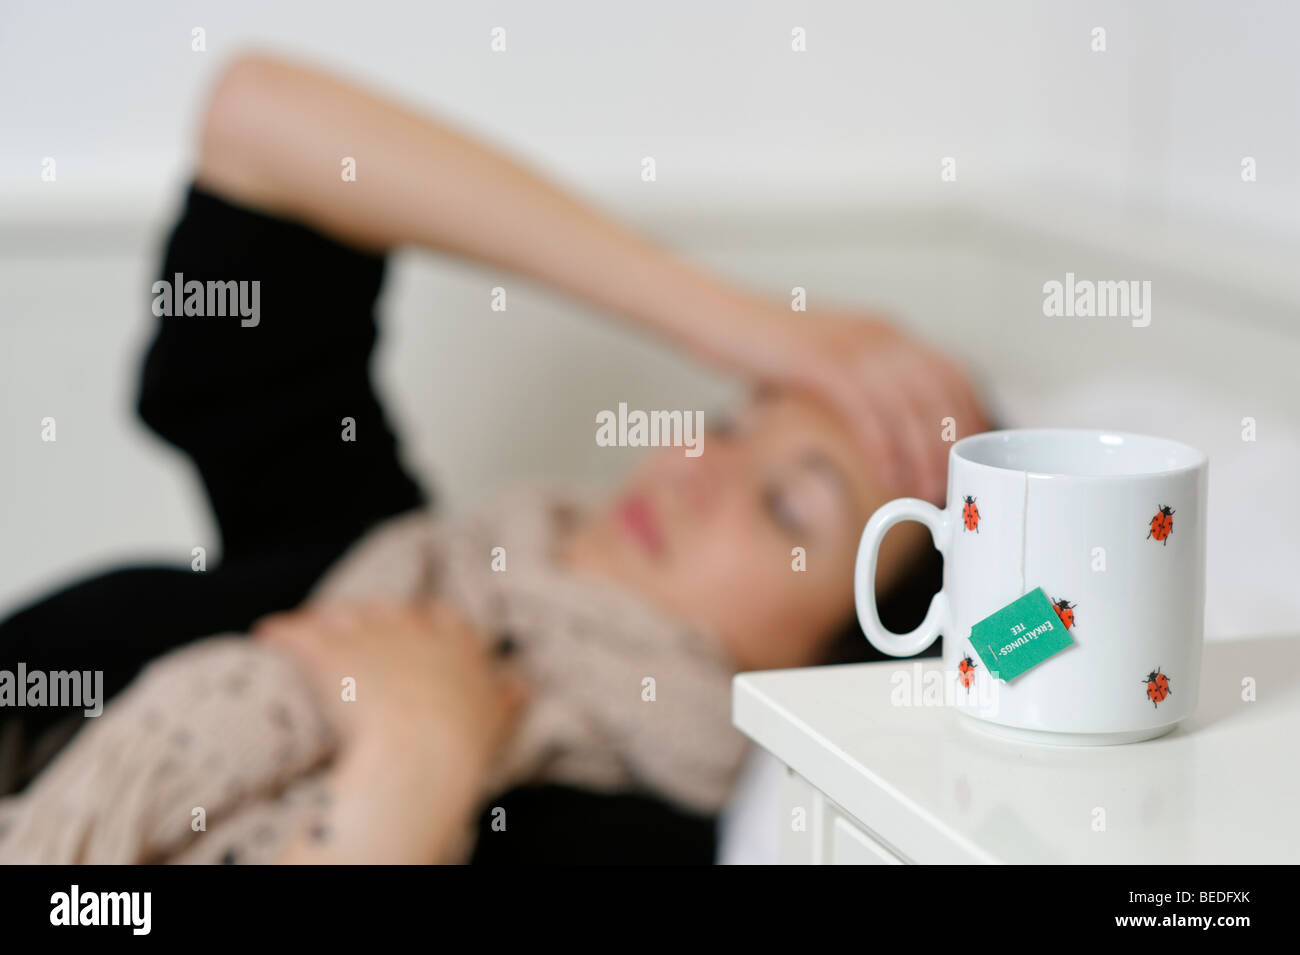 Young woman lying in bed with a cough, cold, flu, ill Stock Photo